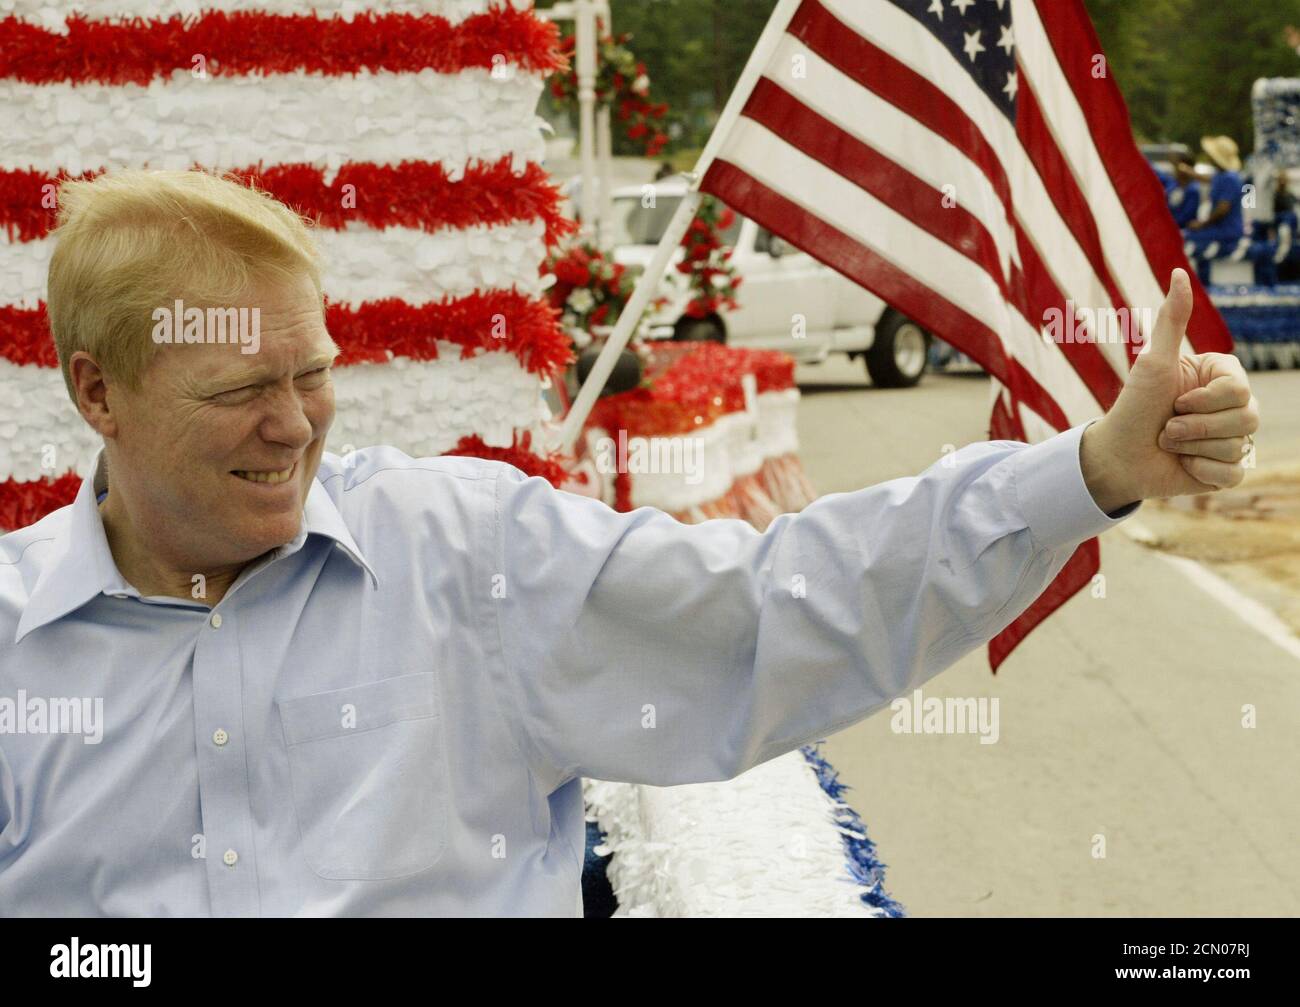 Democratic presidential hopeful U.S. Congressman Richard Gephardt of Missouri gives a thumbs up to spectators in Eastover, South Carolina as he rides on a float while serving as the Grand Marshall in the small town's parade May 3, 2003. Gephardt campaigned in Eastover before joining eight other Democratic presidential hopefuls in Columbia, South Carolina for the first candidates' debate of the 2004 U.S. presidential campaign later in the day. REUTERS/Jim Bourg  JRB/ME Stock Photo